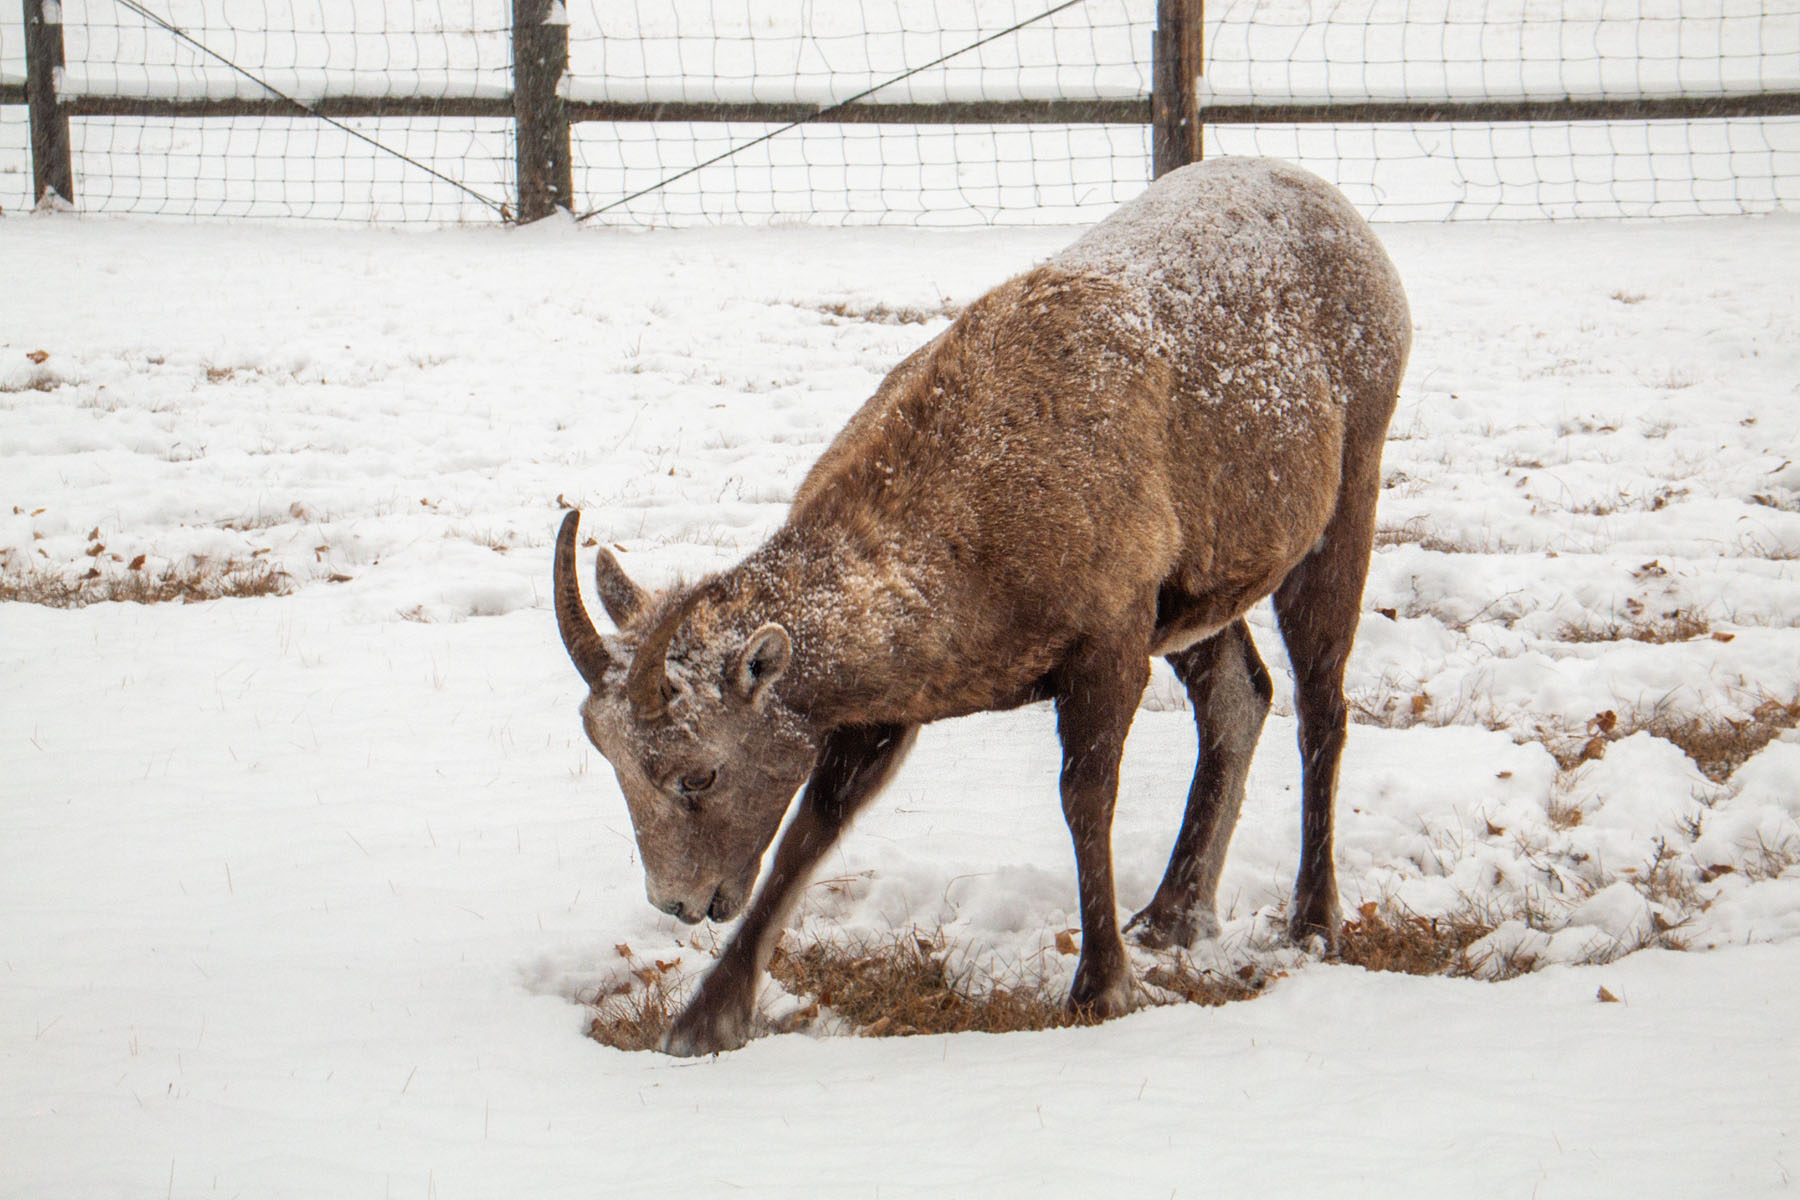 Rocky Mountain Bighorn ewe digs through the snow to feed, Custer State Park.  Click for next photo.